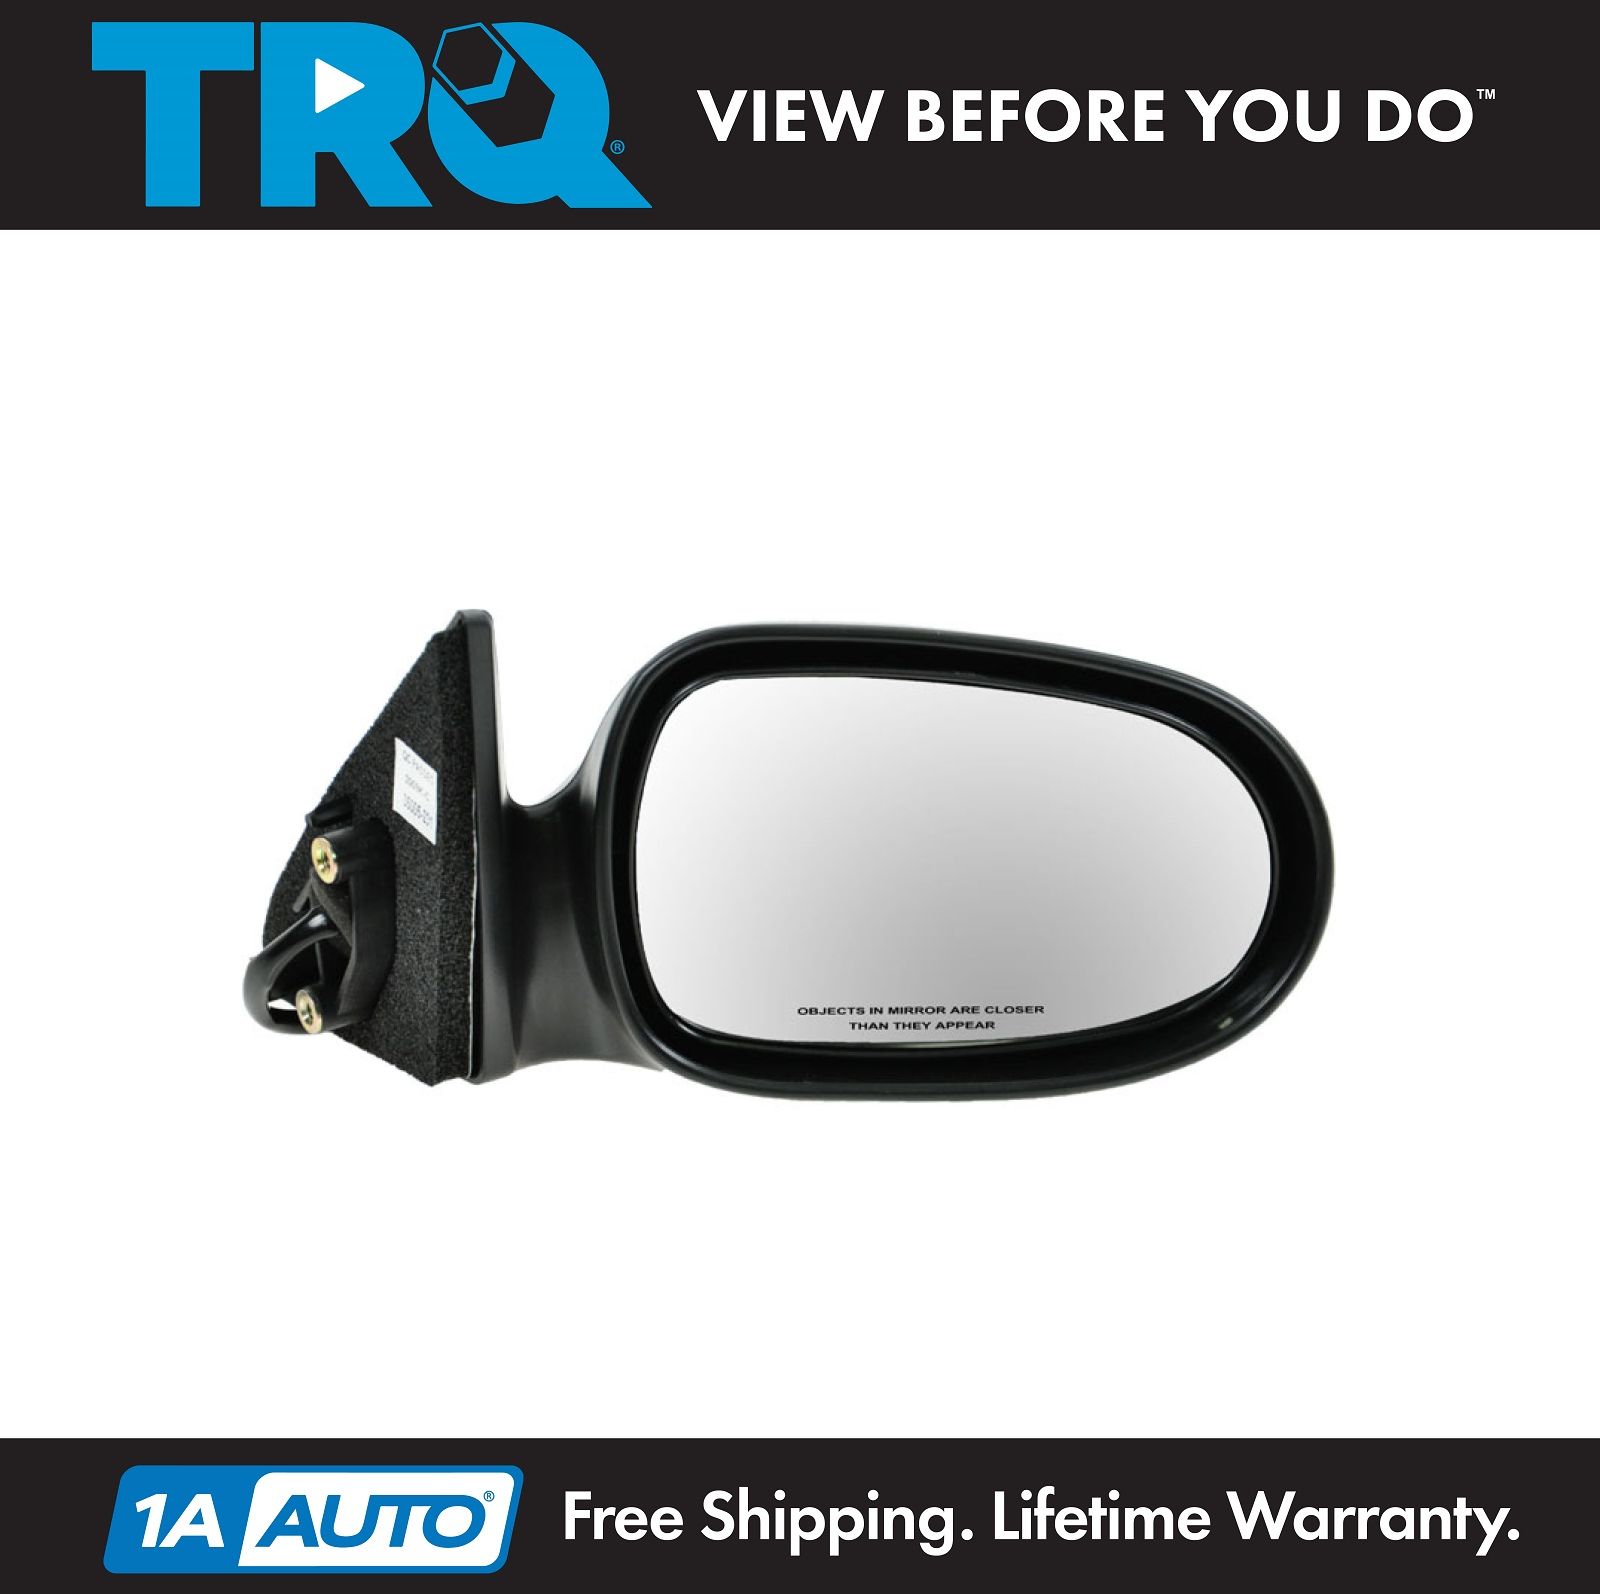 US Made Door Mirror Glass Replacement Driver Side For Nissan Maxima 95-99